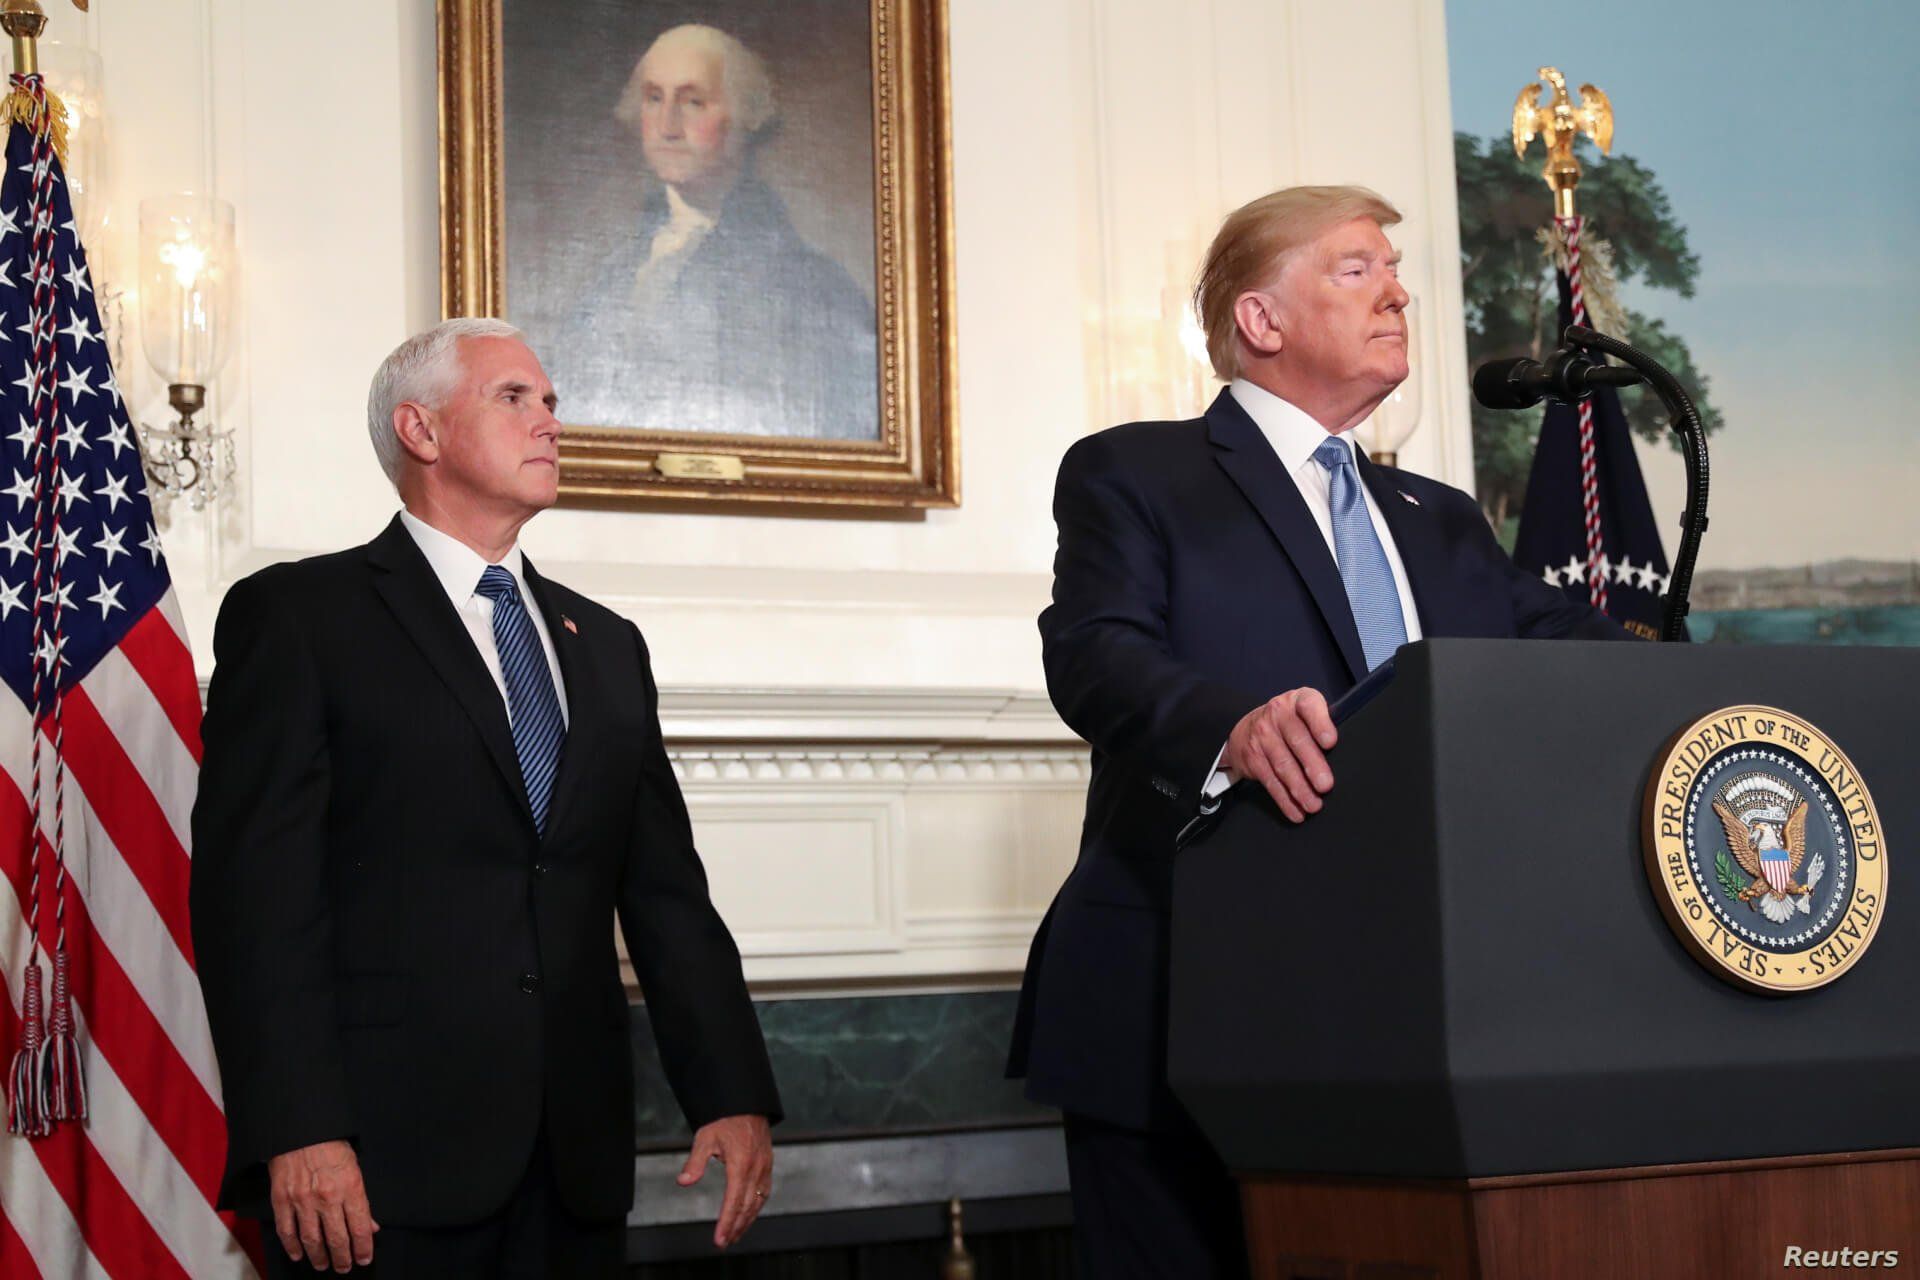 President Donald Trump speaks about the shootings in El Paso and Dayton as Vice President Mike Pence looks on in the Diplomatic Room of the White House in Washington, Aug. 5, 2019.